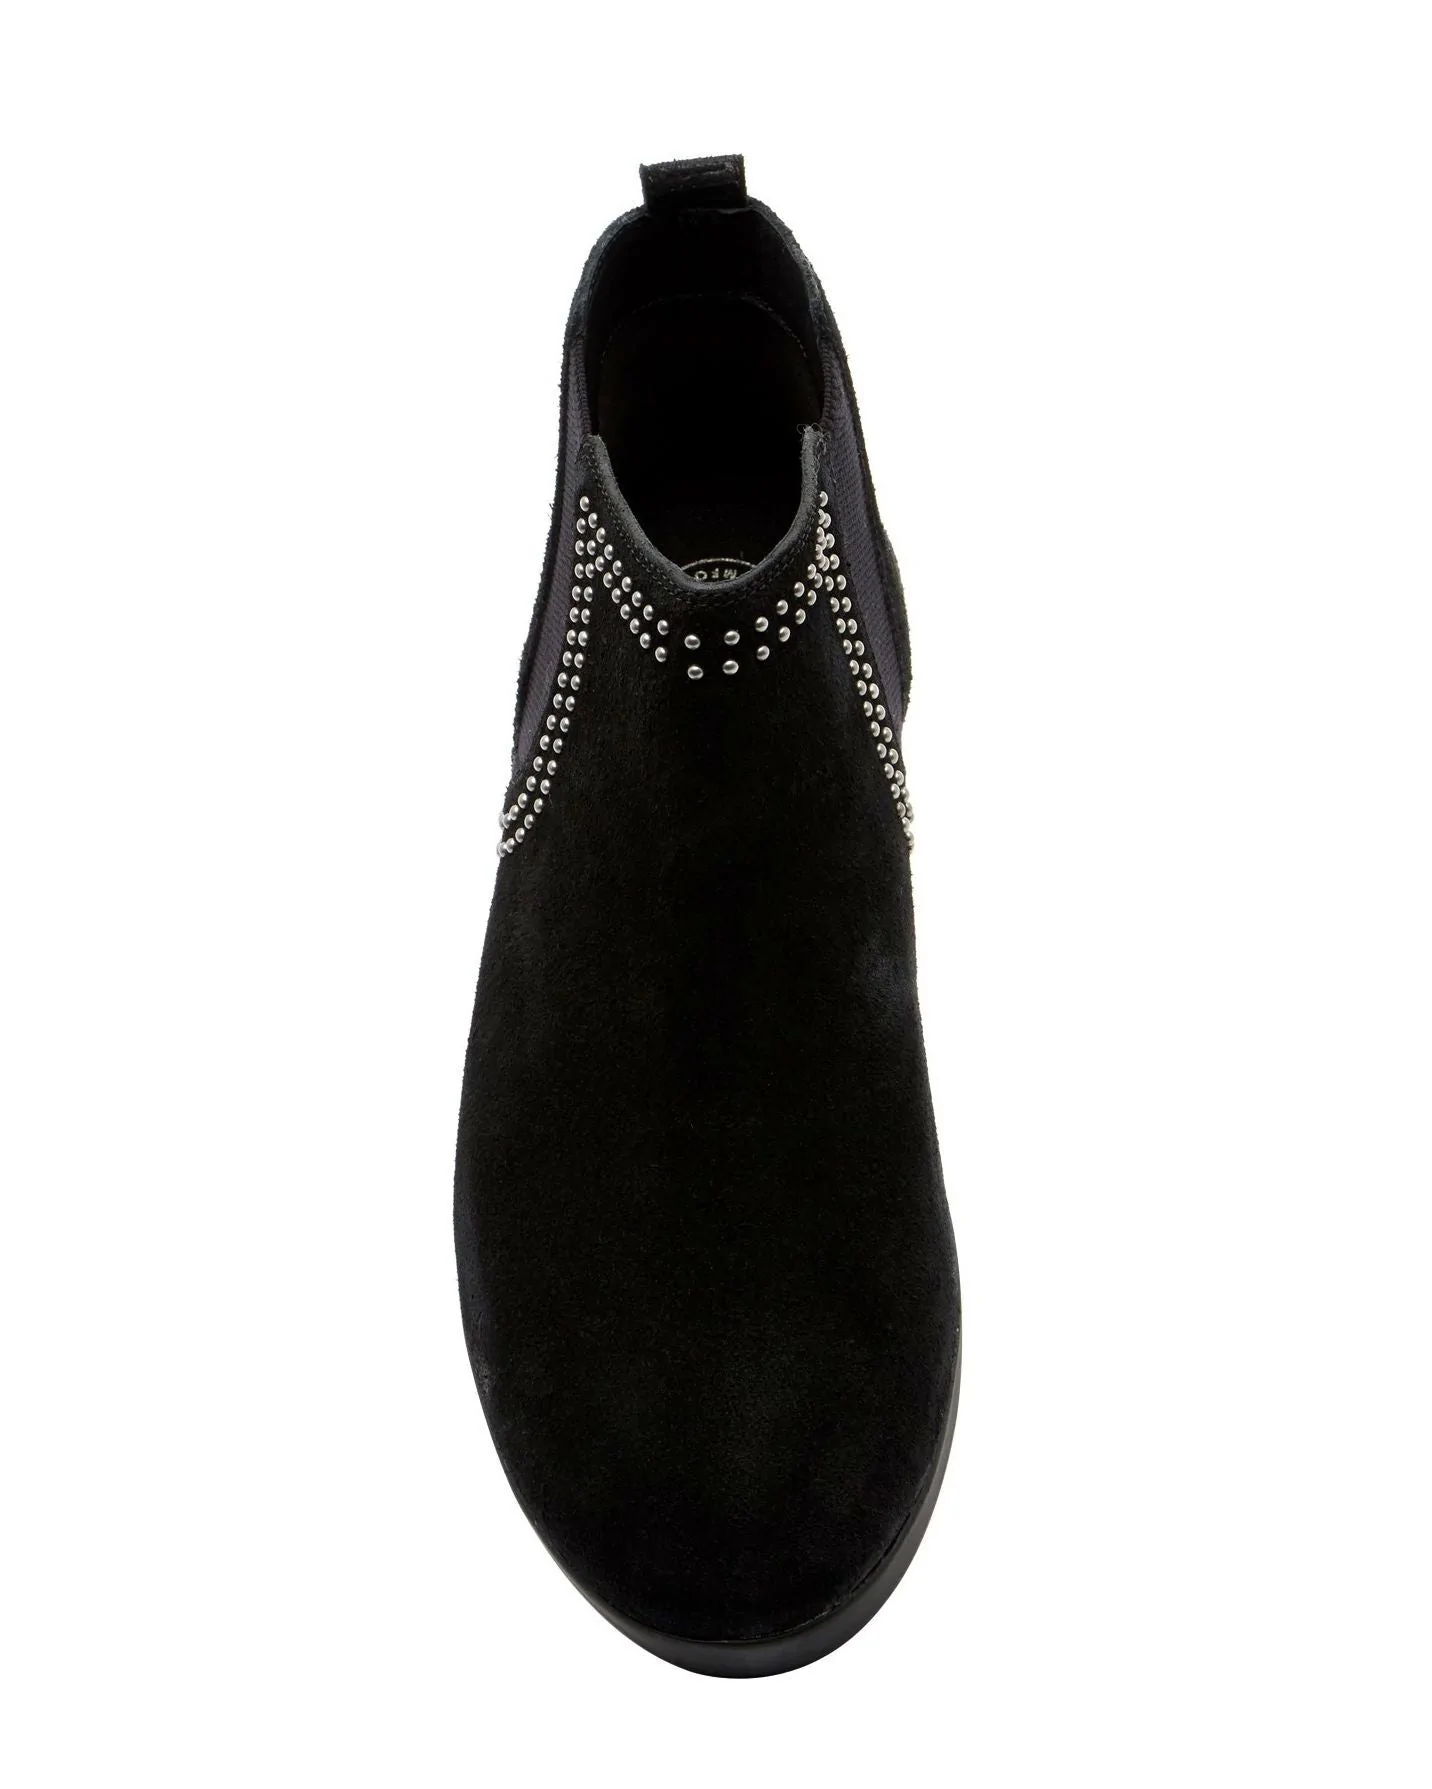 FitFlop Studded Suede Super Chelsea Boot